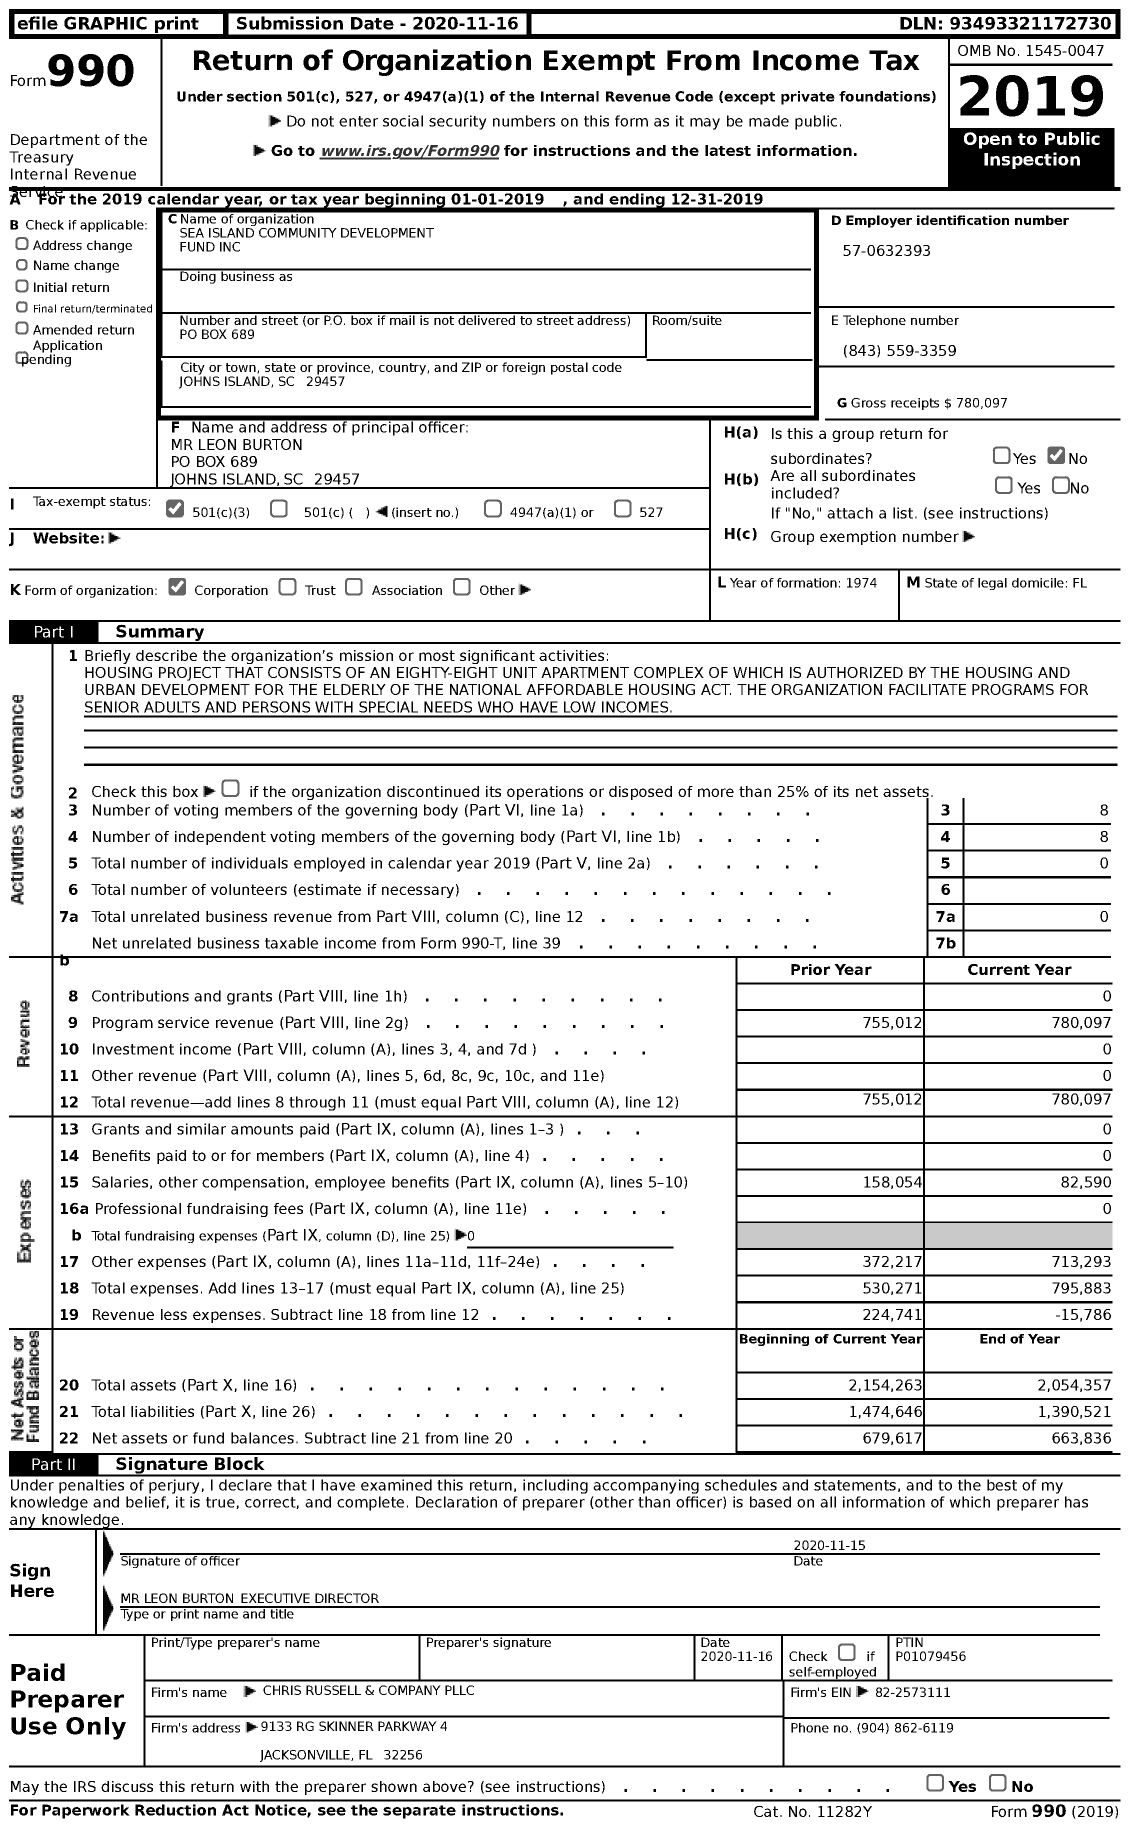 Image of first page of 2019 Form 990 for Sea Island Community Development Fund